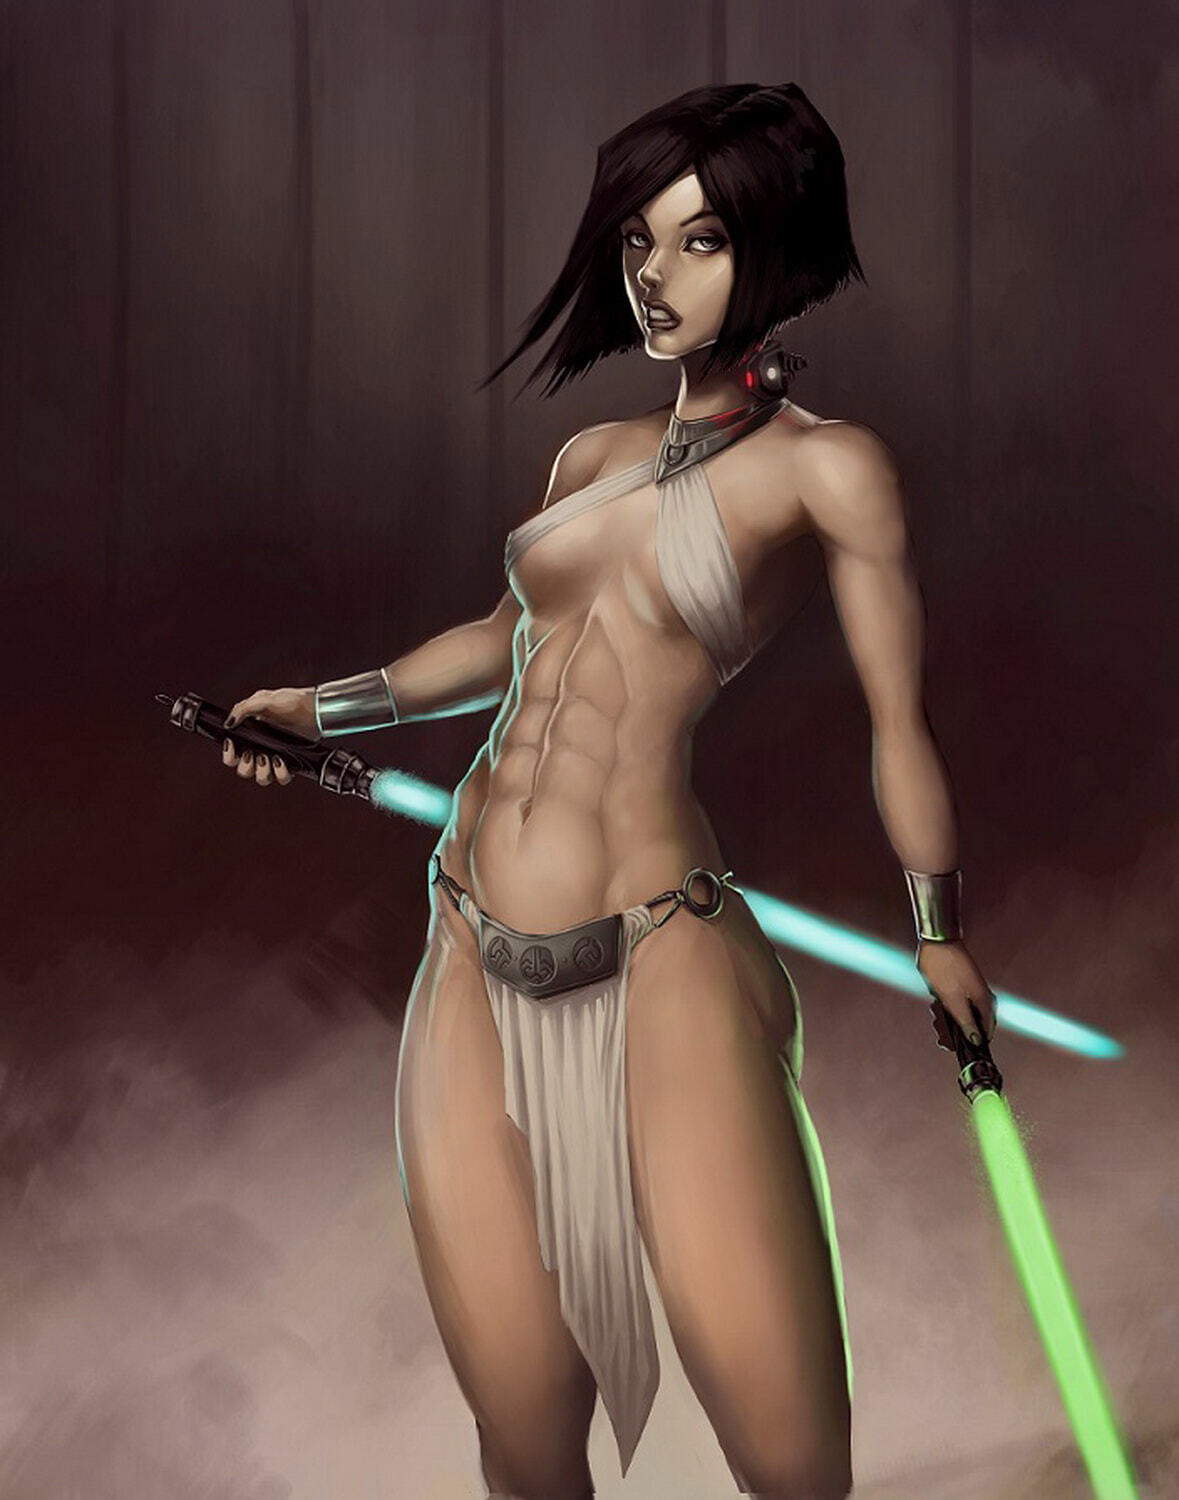 Star Wars pics tagged as solo, muscular female, female only. 